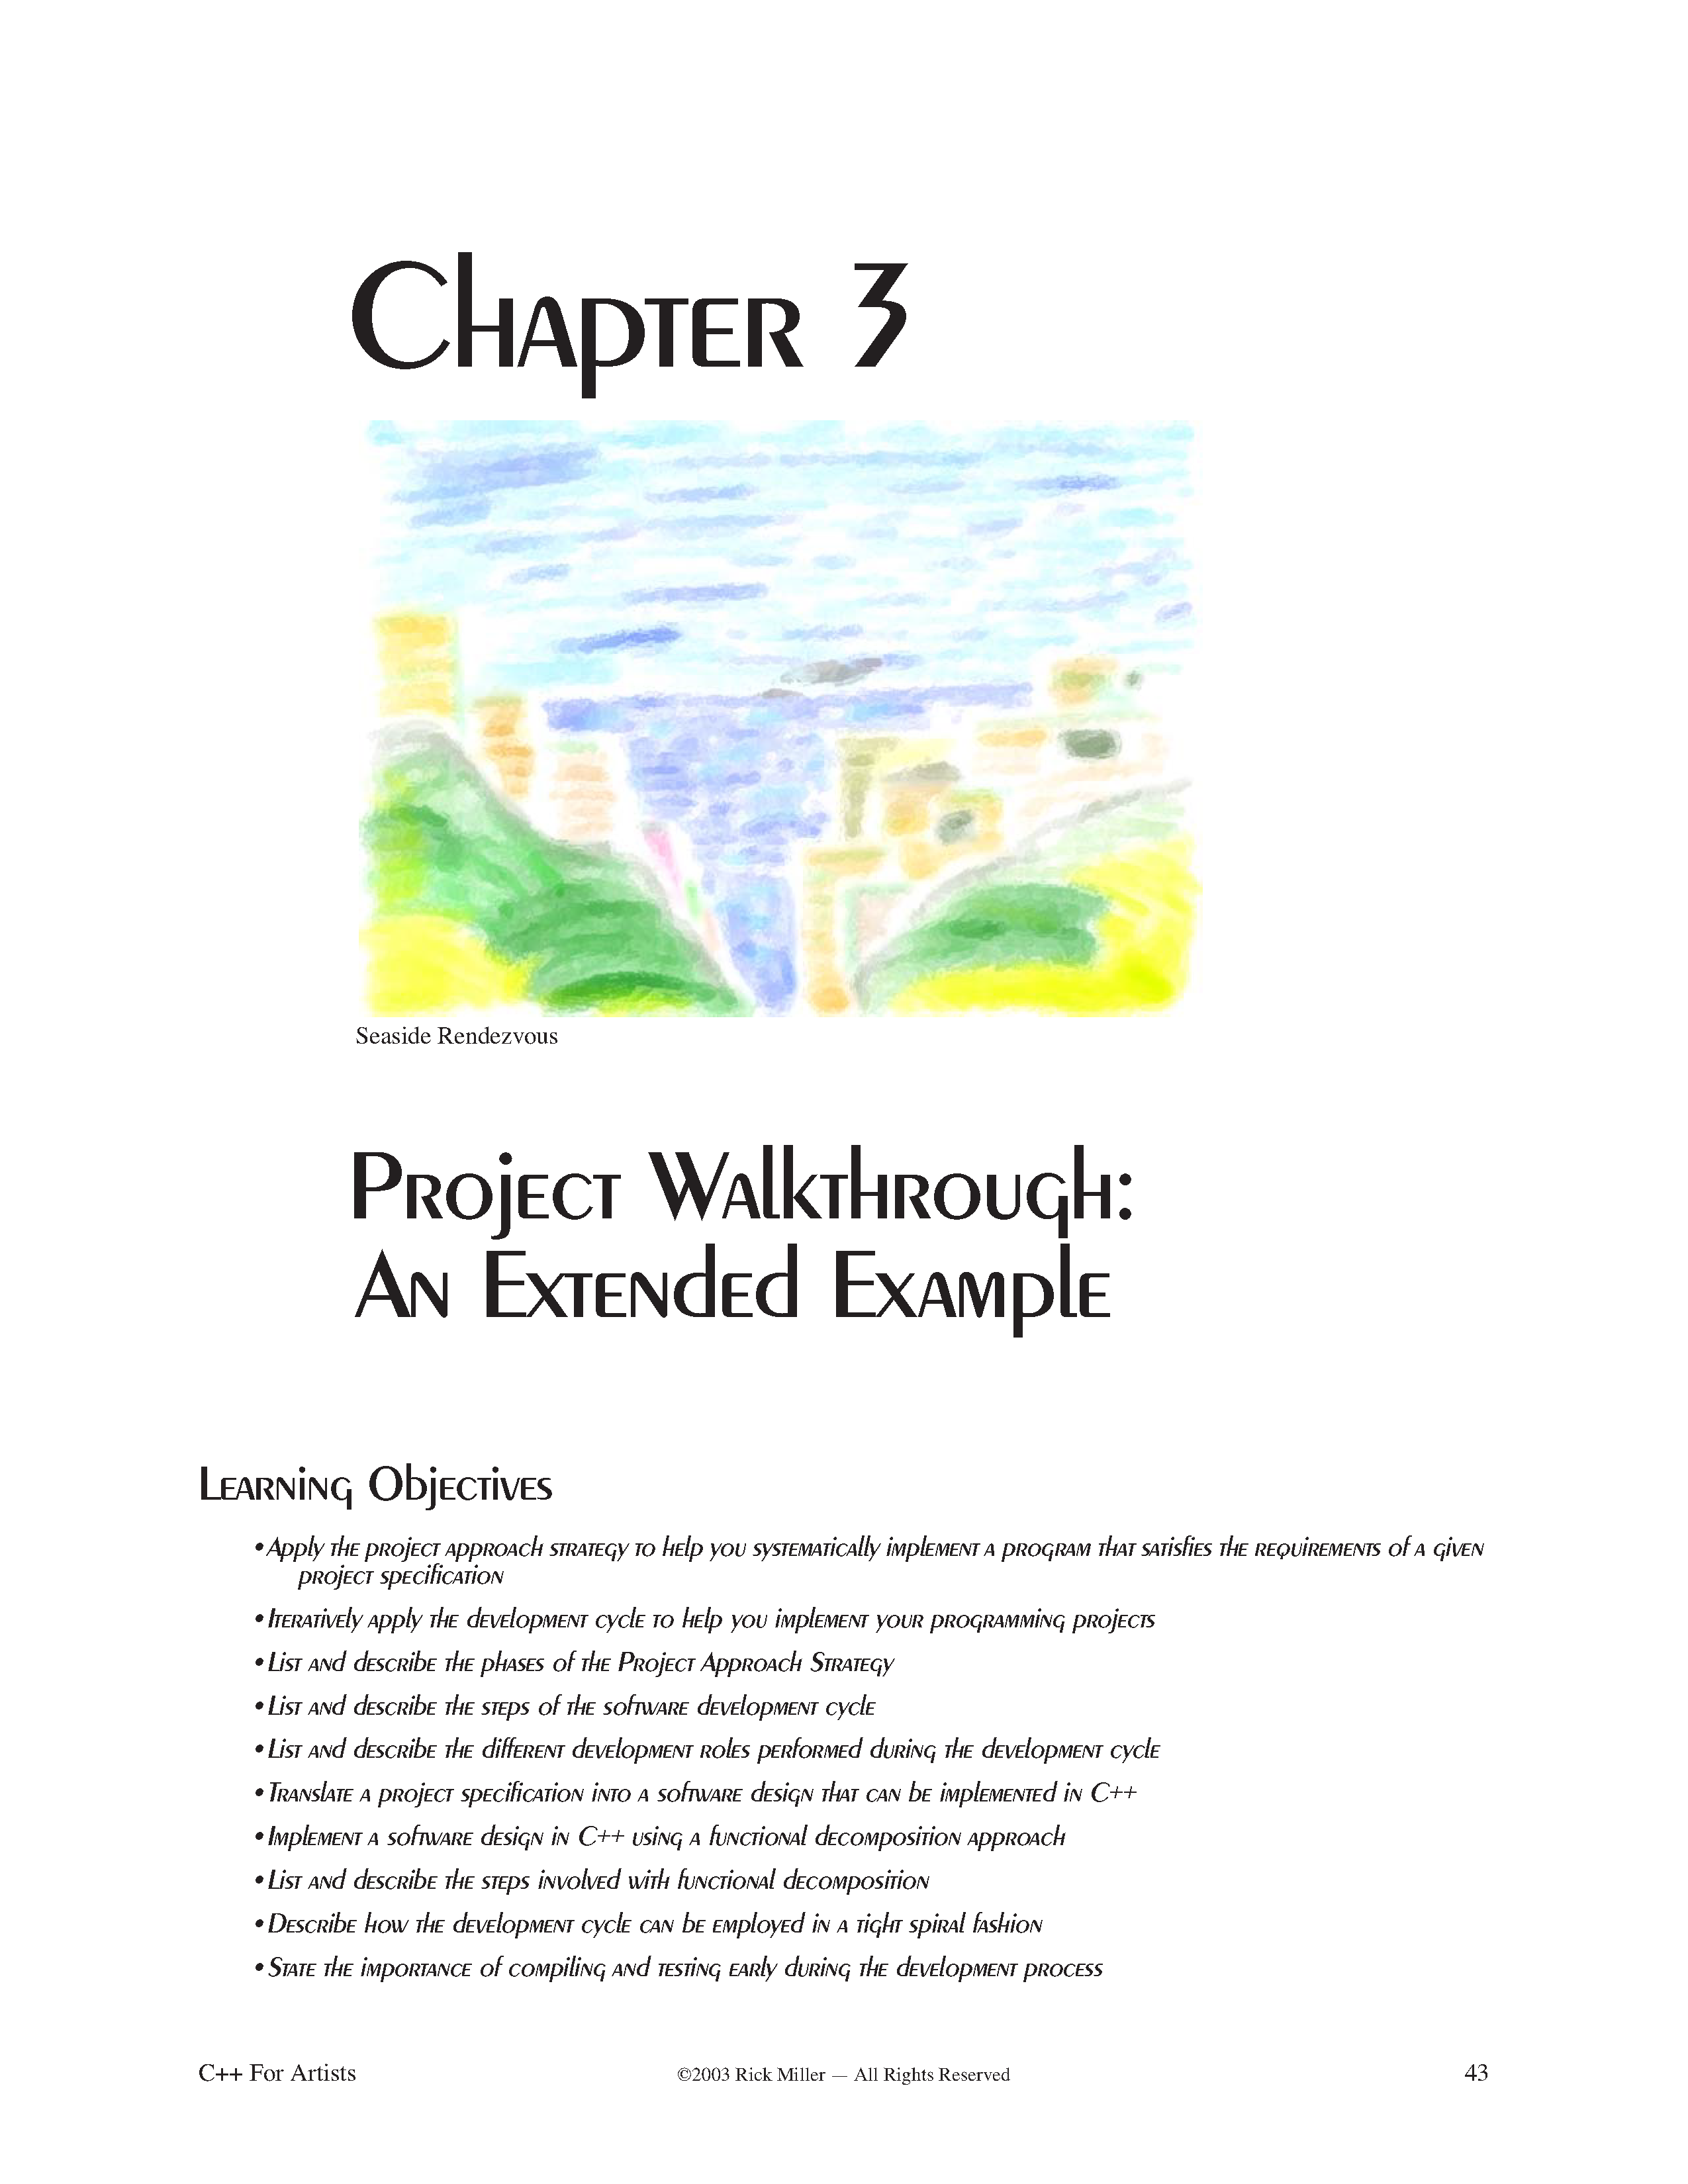 C++ For Artists 1st ED Chapter 3